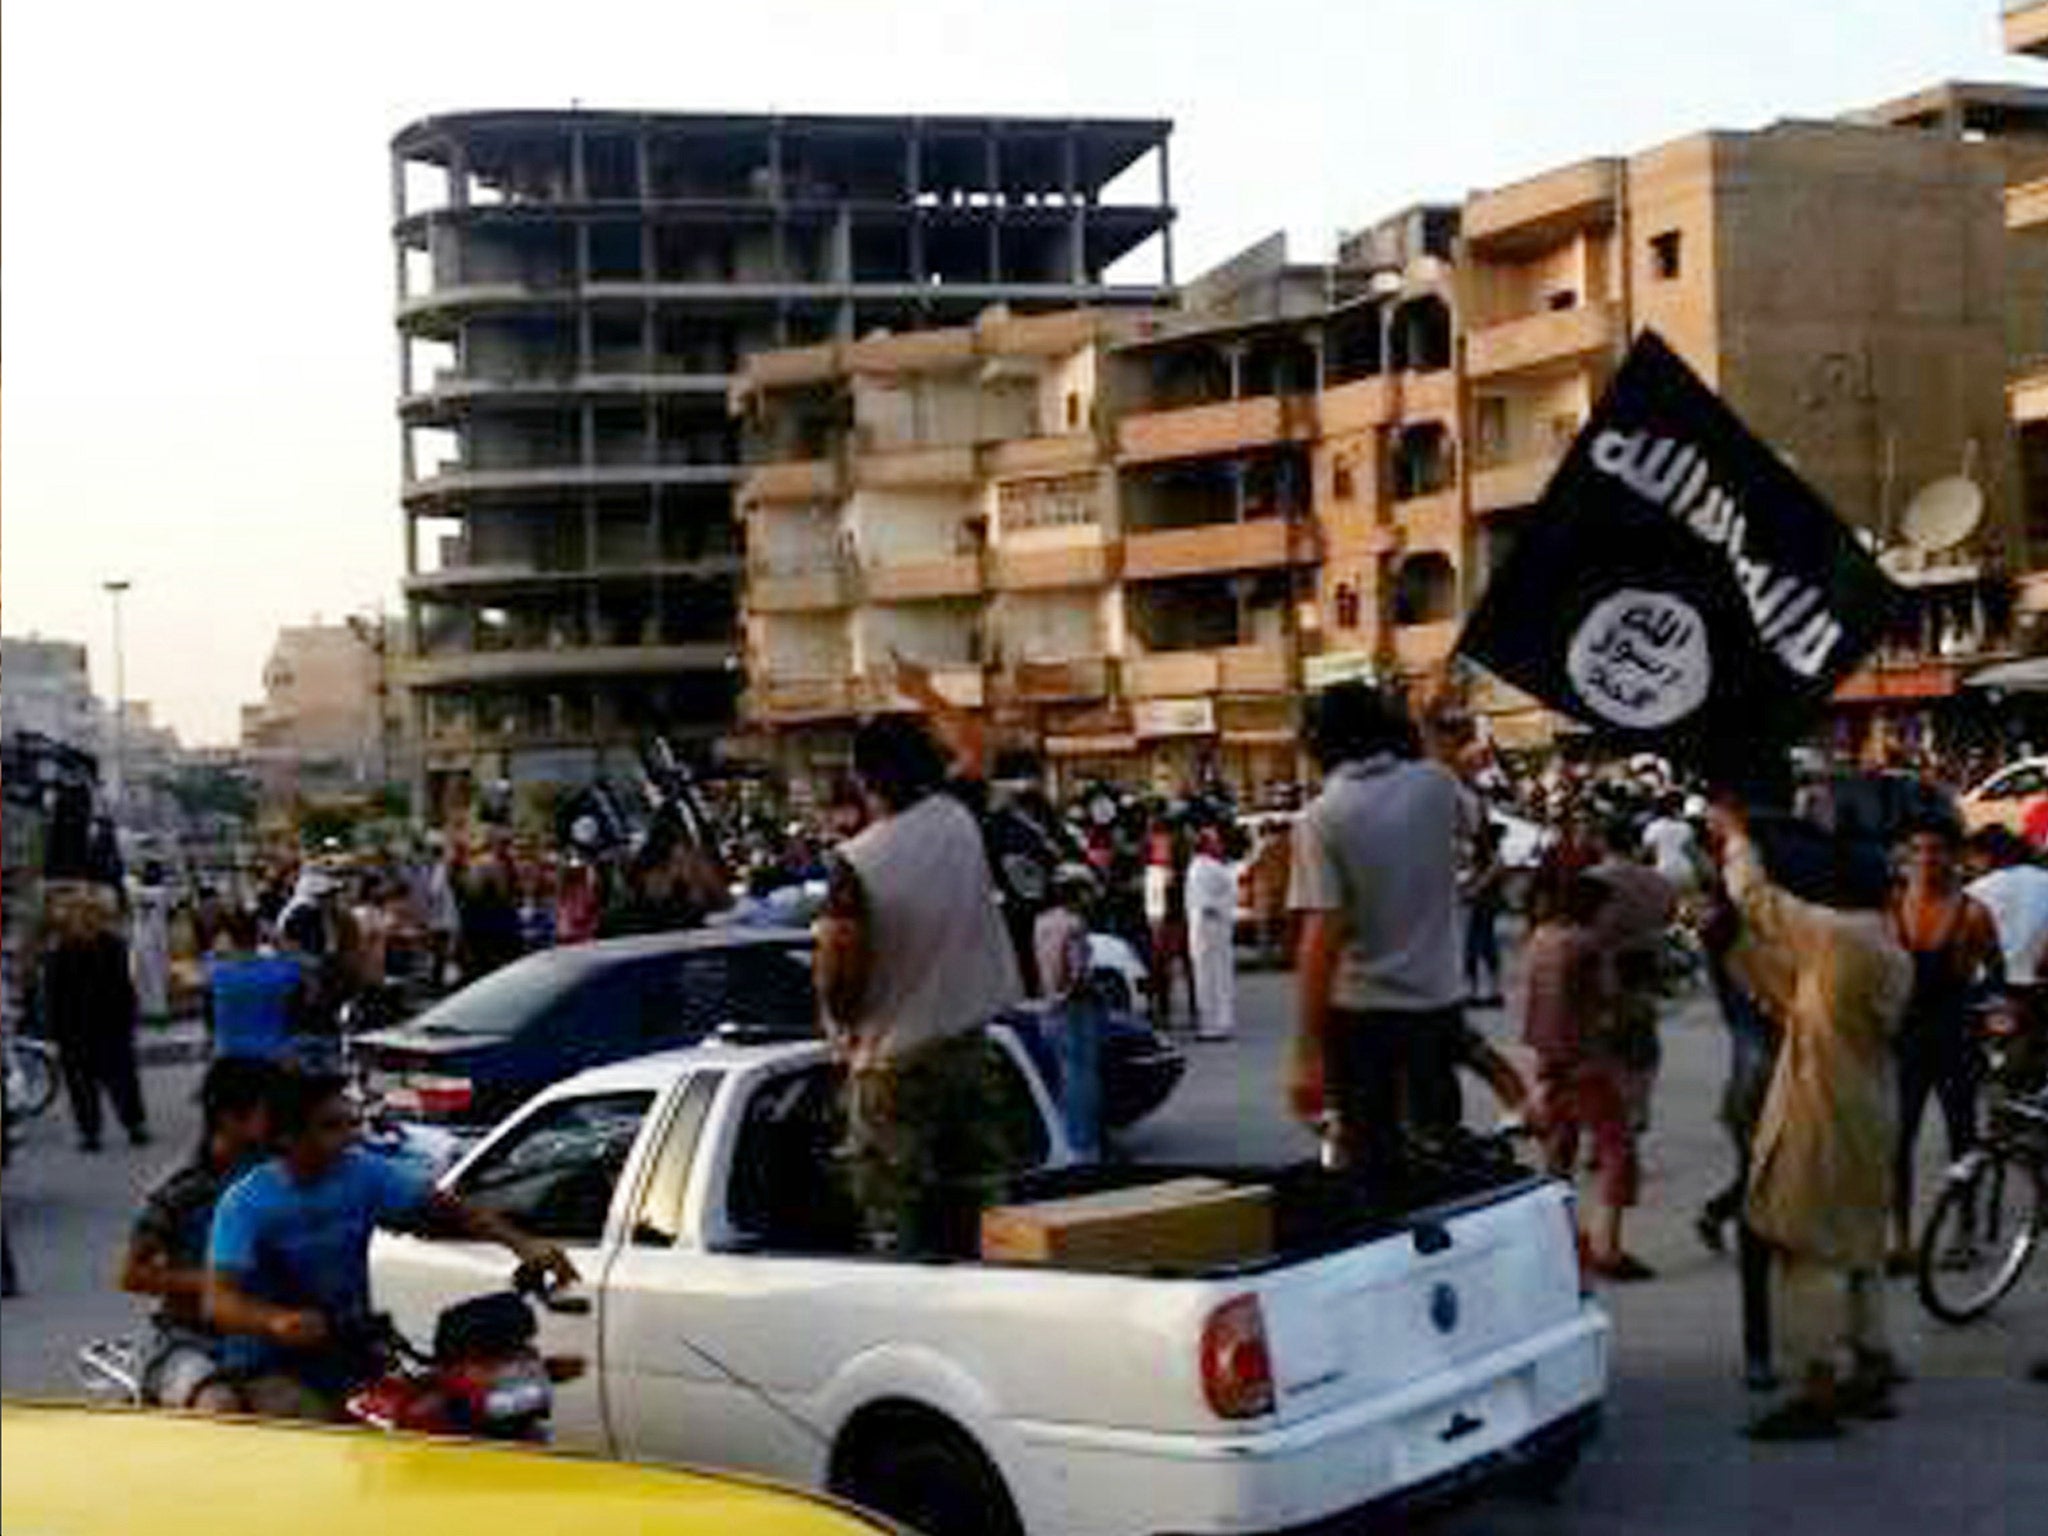 Isis fighters and supporters during a parade in Raqqa in June